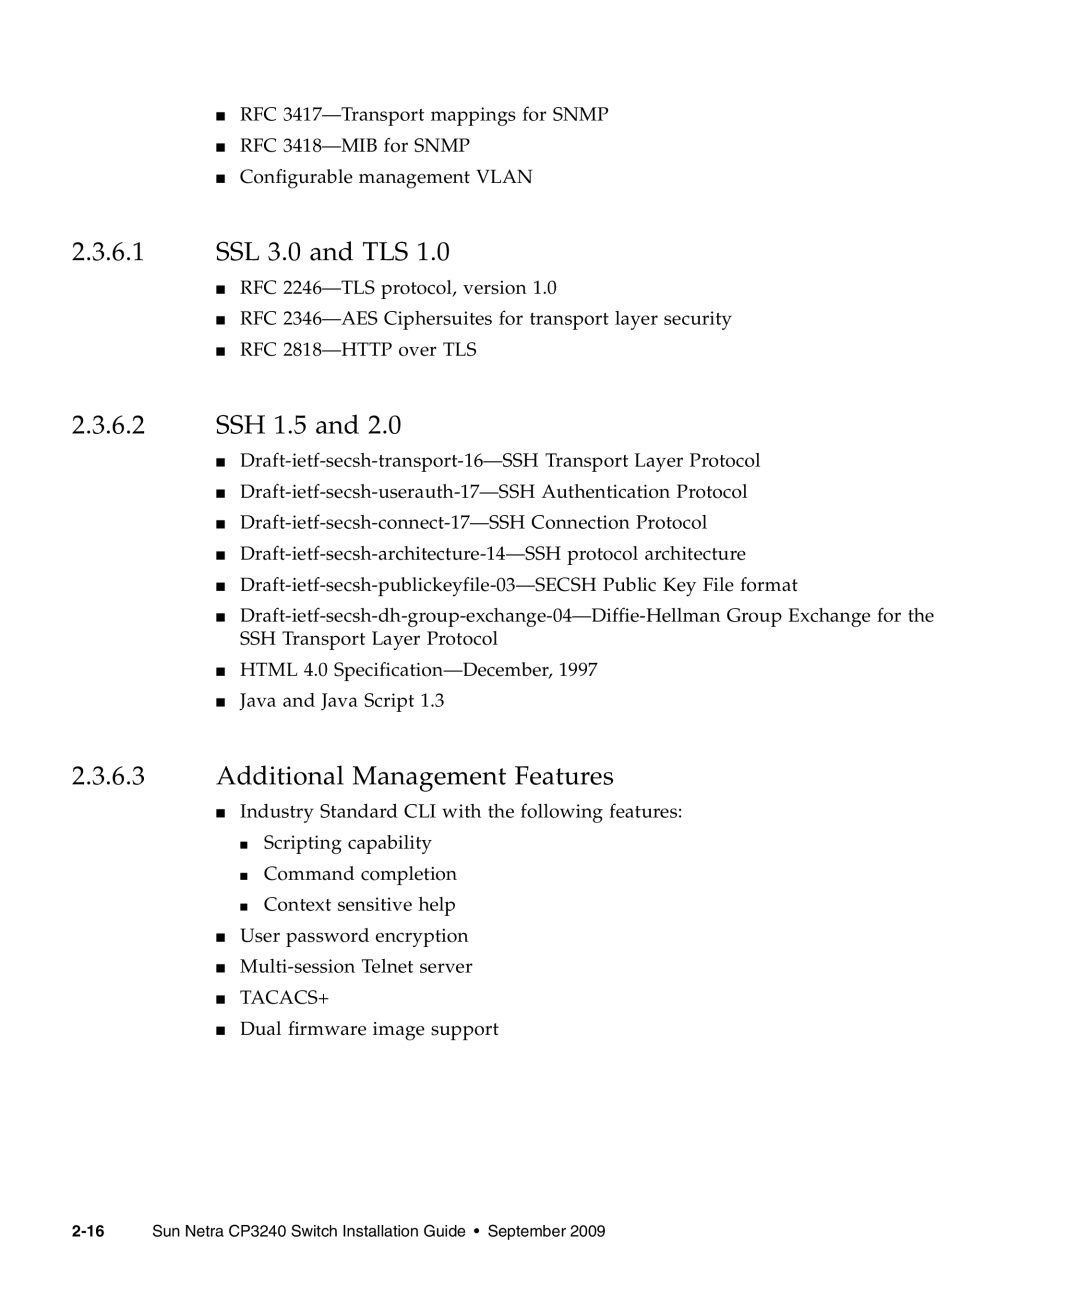 Sun Microsystems CP3240 manual SSL 3.0 and TLS, SSH 1.5 and, Additional Management Features 